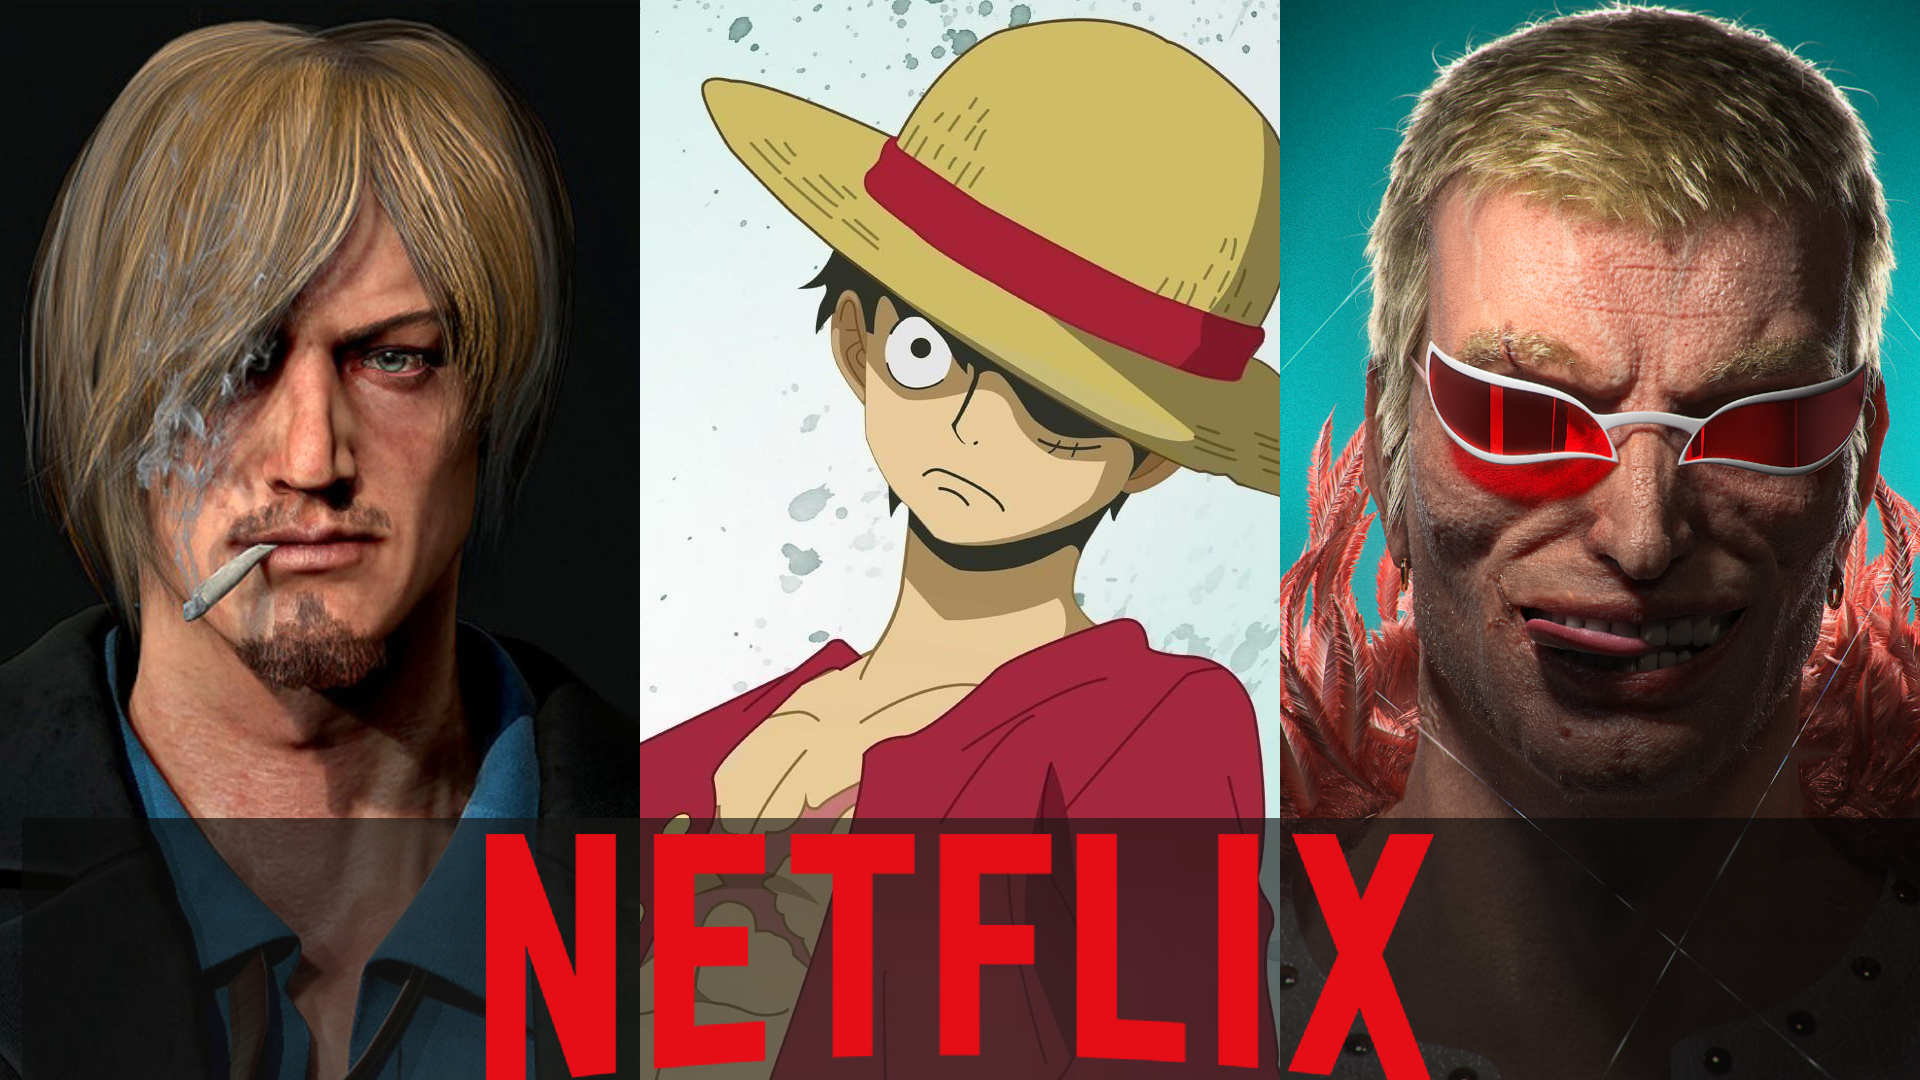 One Piece Scandals - Netflix Is Working on Live-Action One Piece: Episode 1â€¦ | EarlyGame